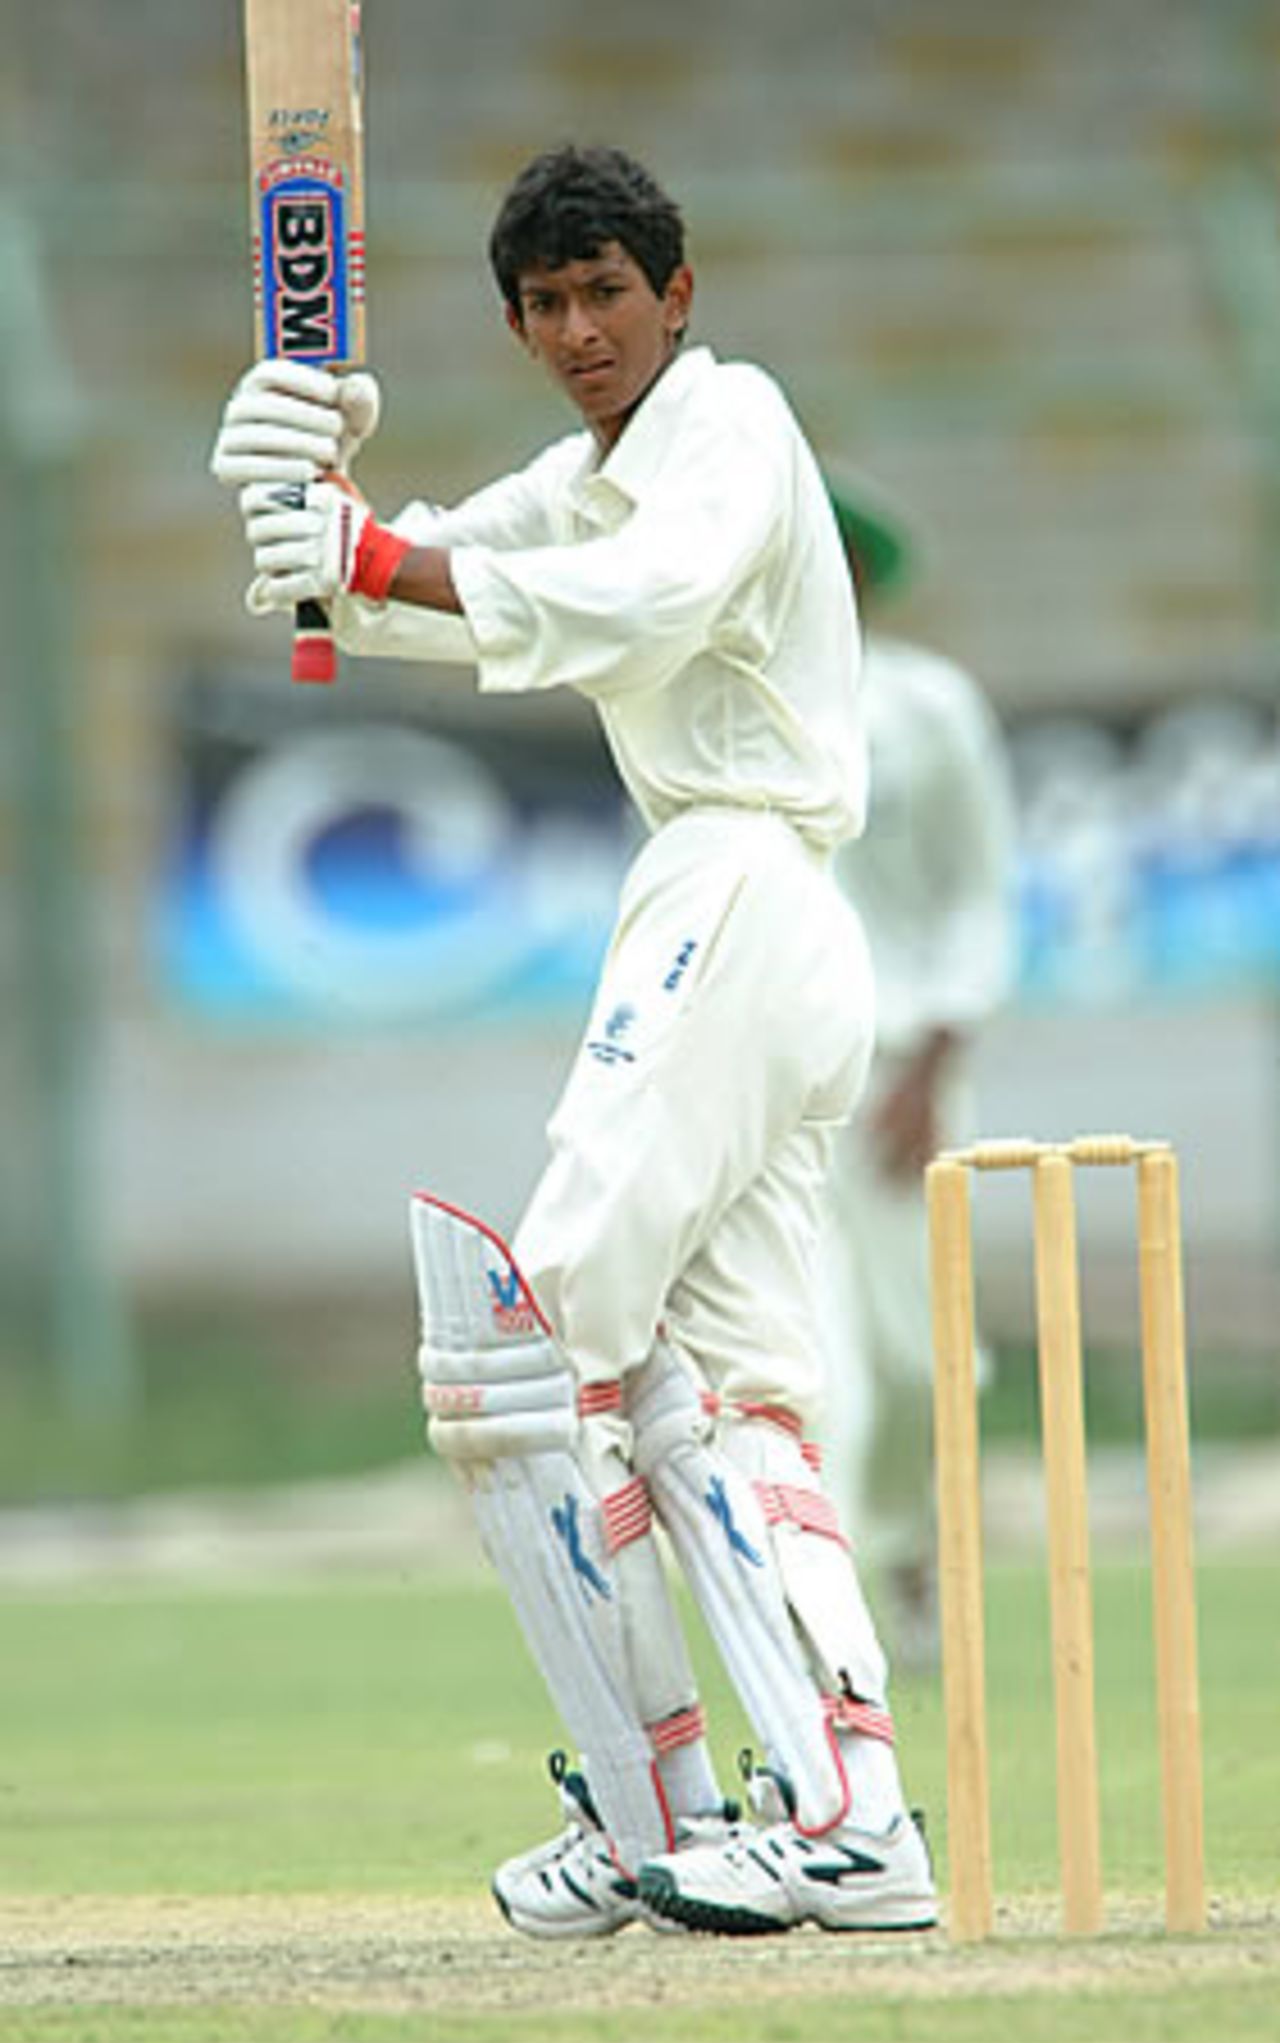 Darshil Upendra hit 27 for Thailand, Malaysia Under-19s v Thailand Under-19s at National Stadium Karachi, Youth Asia Cup 2003, 23 July 2003.